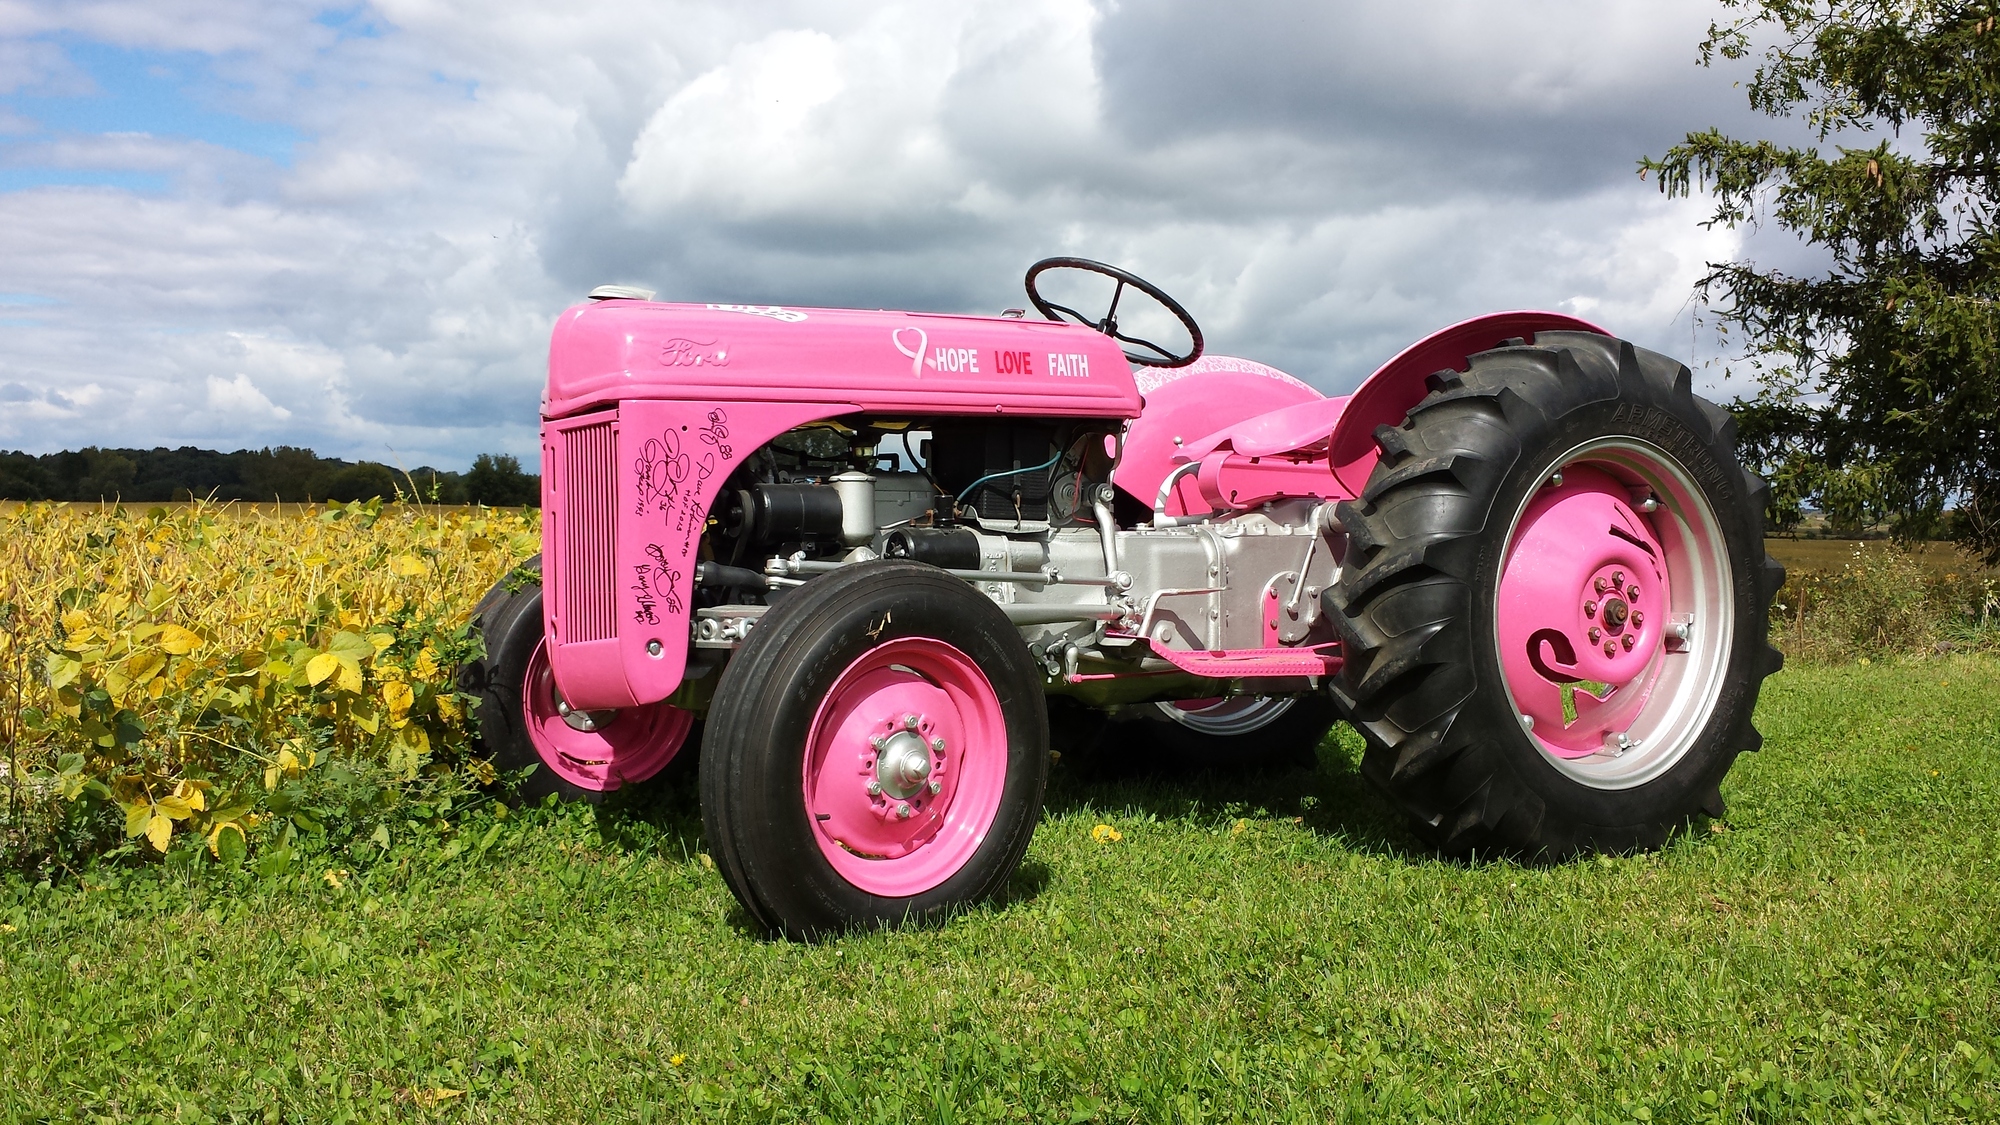 8n Ford Pink Tractor Tractors Antique Pontel Kevin Think Comment Thomas...